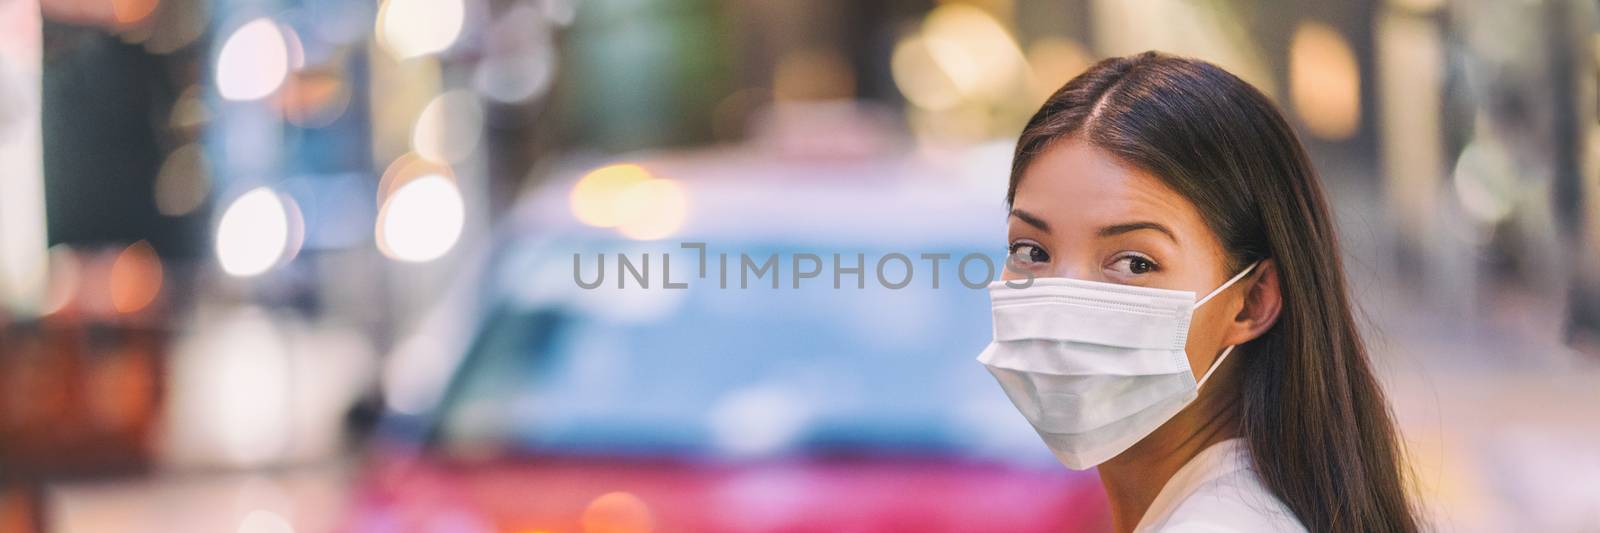 Flu virus protection mask protective against influenza sickness viruses and disease. Sick sian woman wearing surgical face mask in public spaces. Healthcare banner panorama concept by Maridav